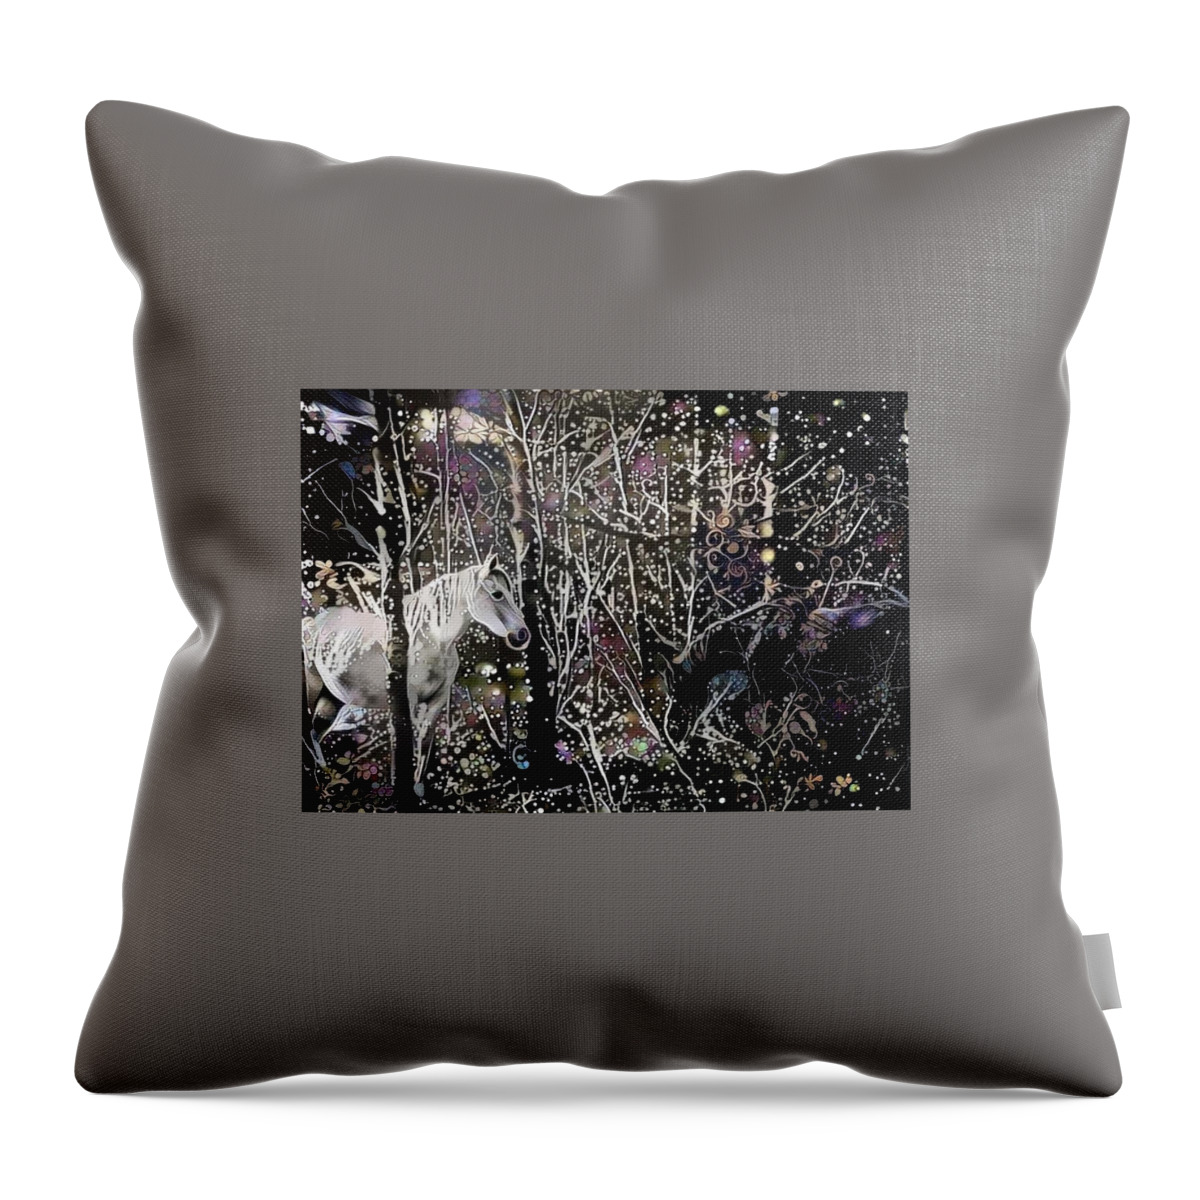 Horse Throw Pillow featuring the digital art Forest Tryst 2 by Listen To Your Horse